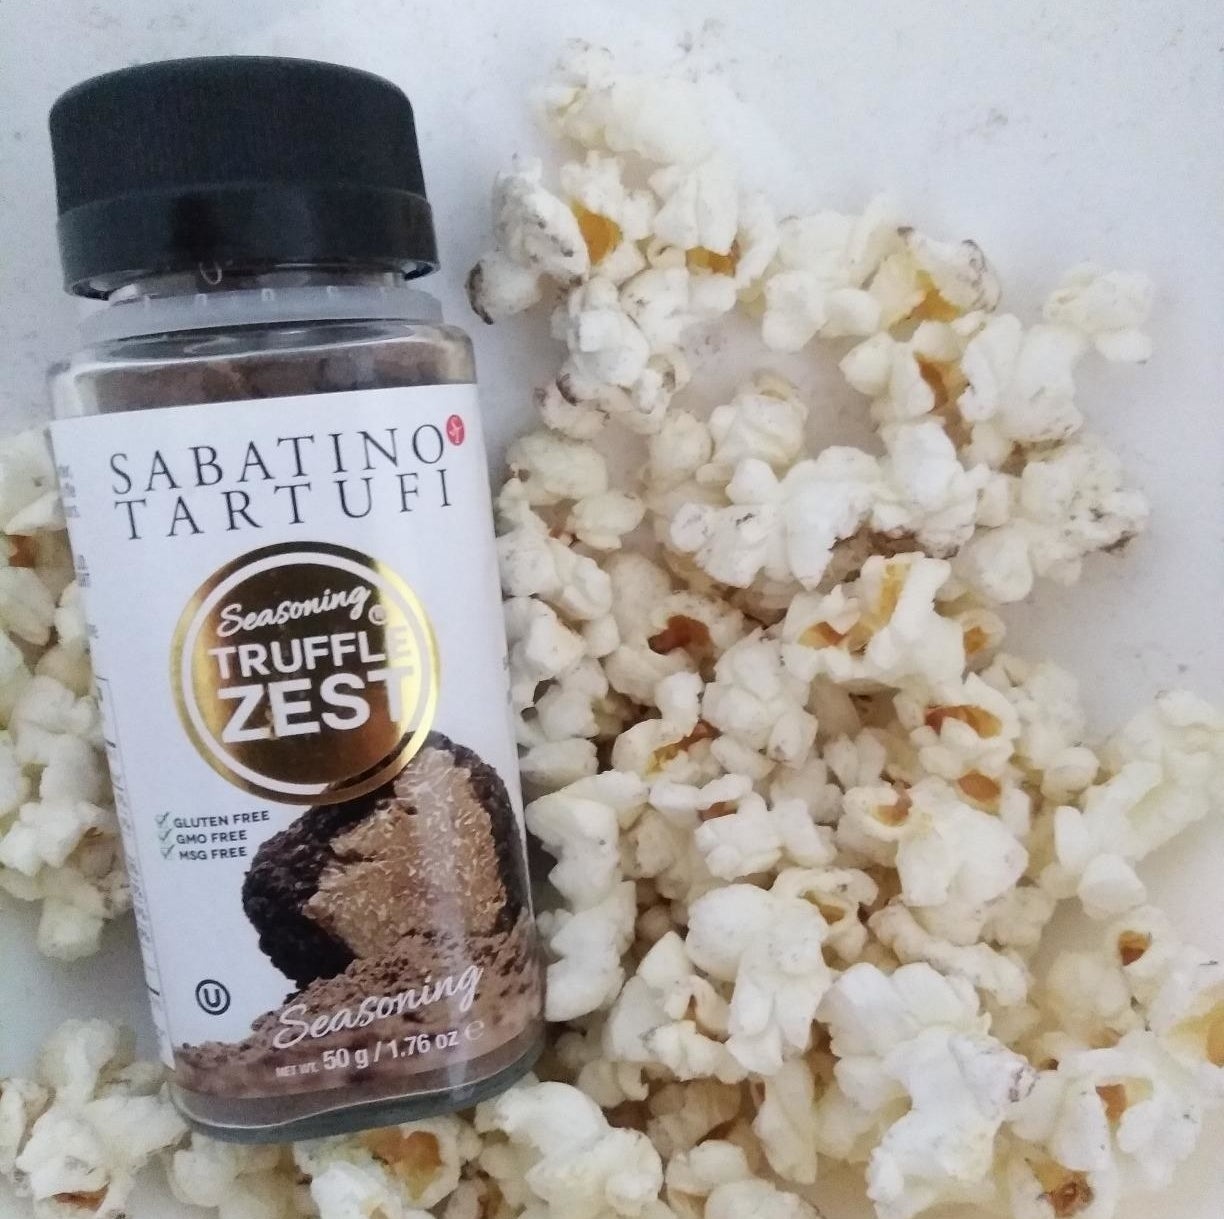 Reviewer image of bottle of seasoning and popcorn